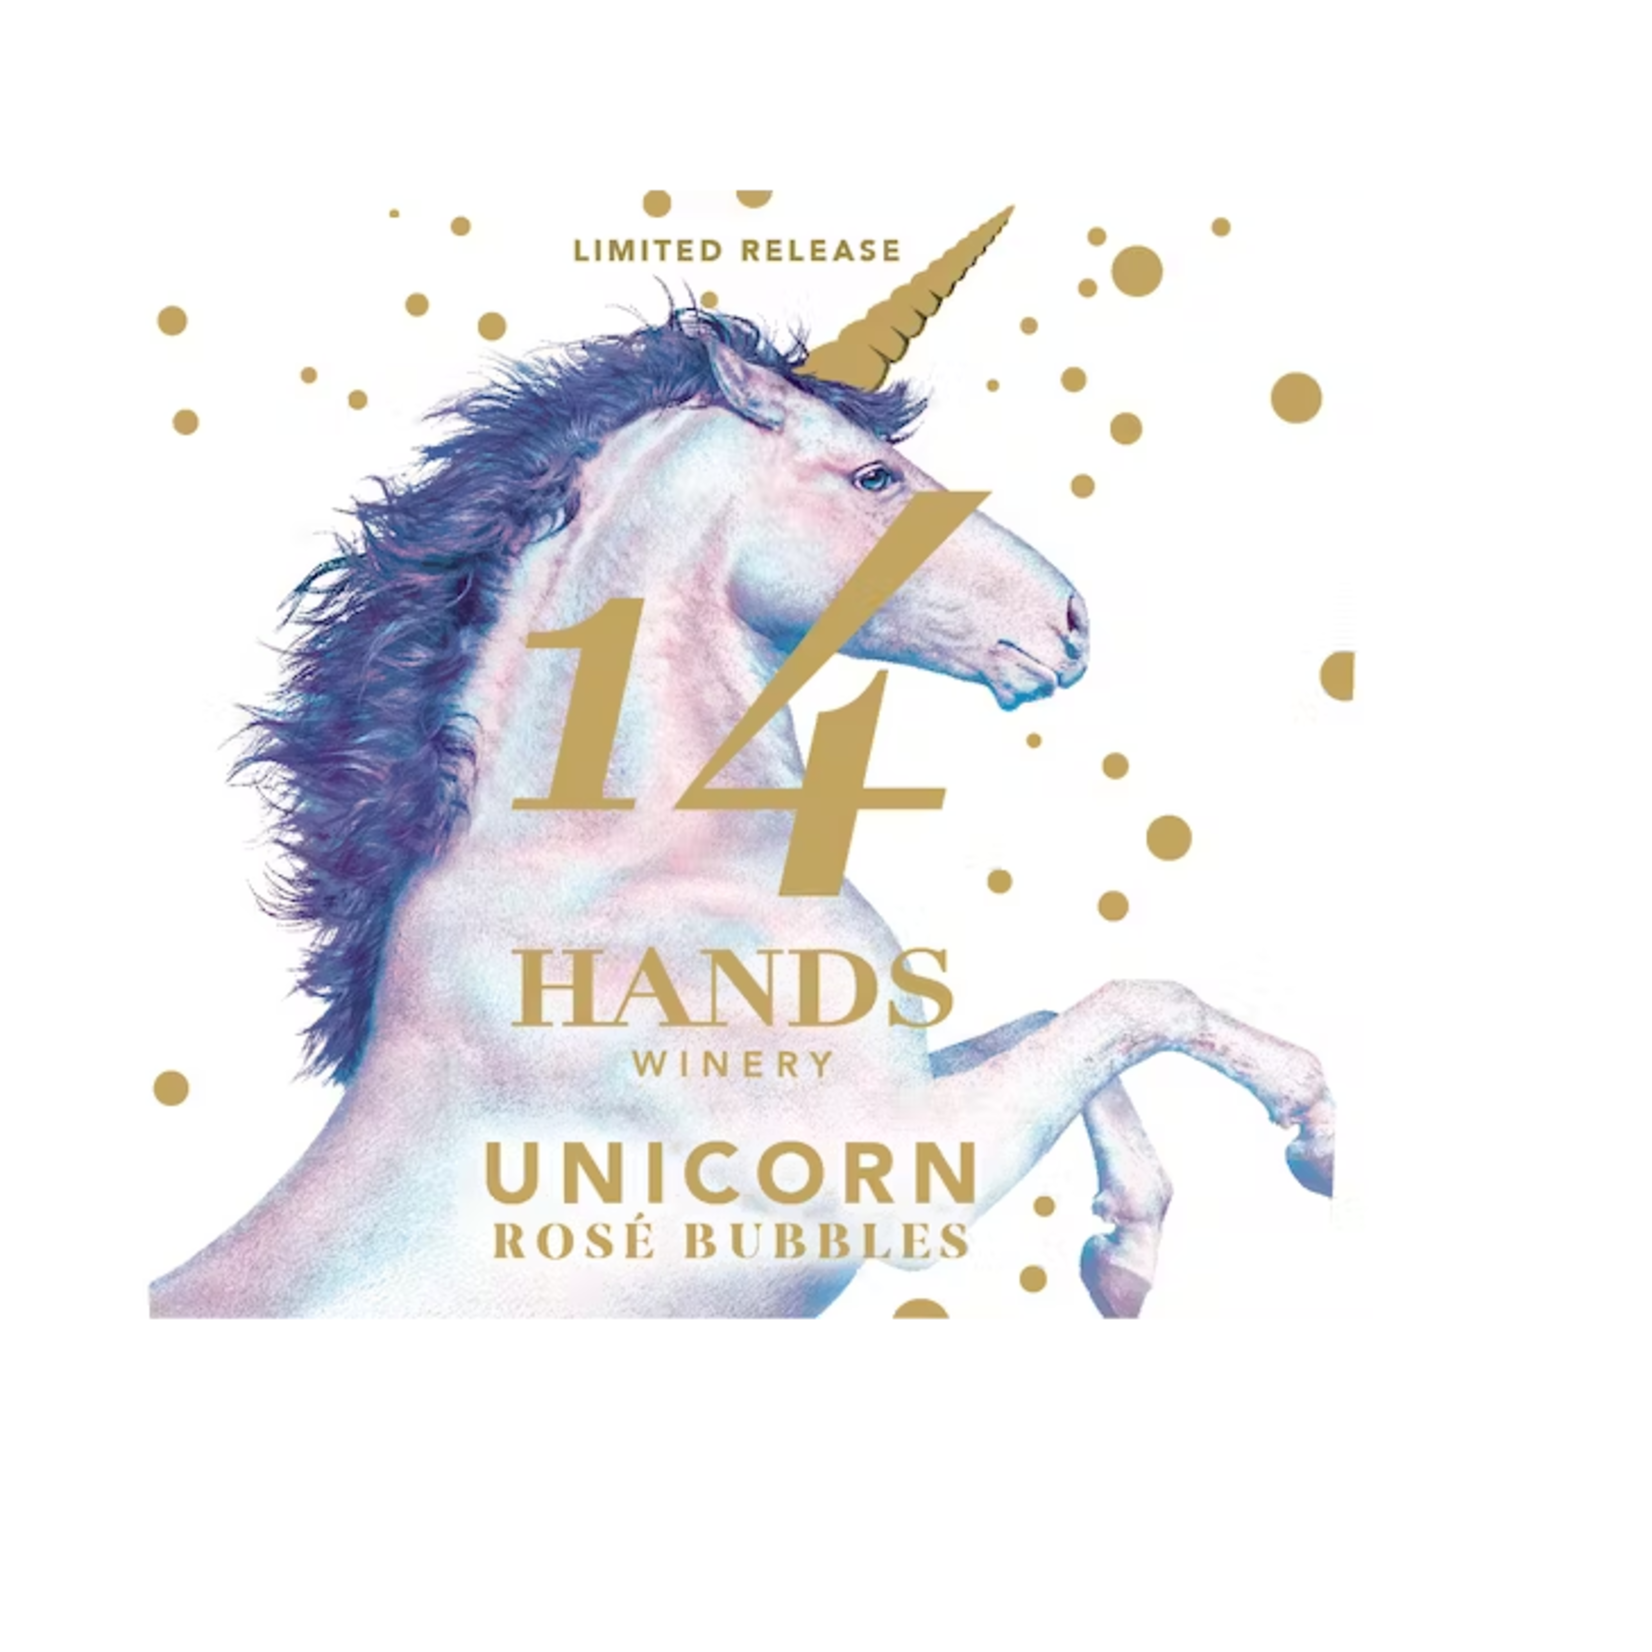 14 Hands Winery 14 hands Unicorn Rosé Bubbles Limited Release   Columbia Valley, Washington